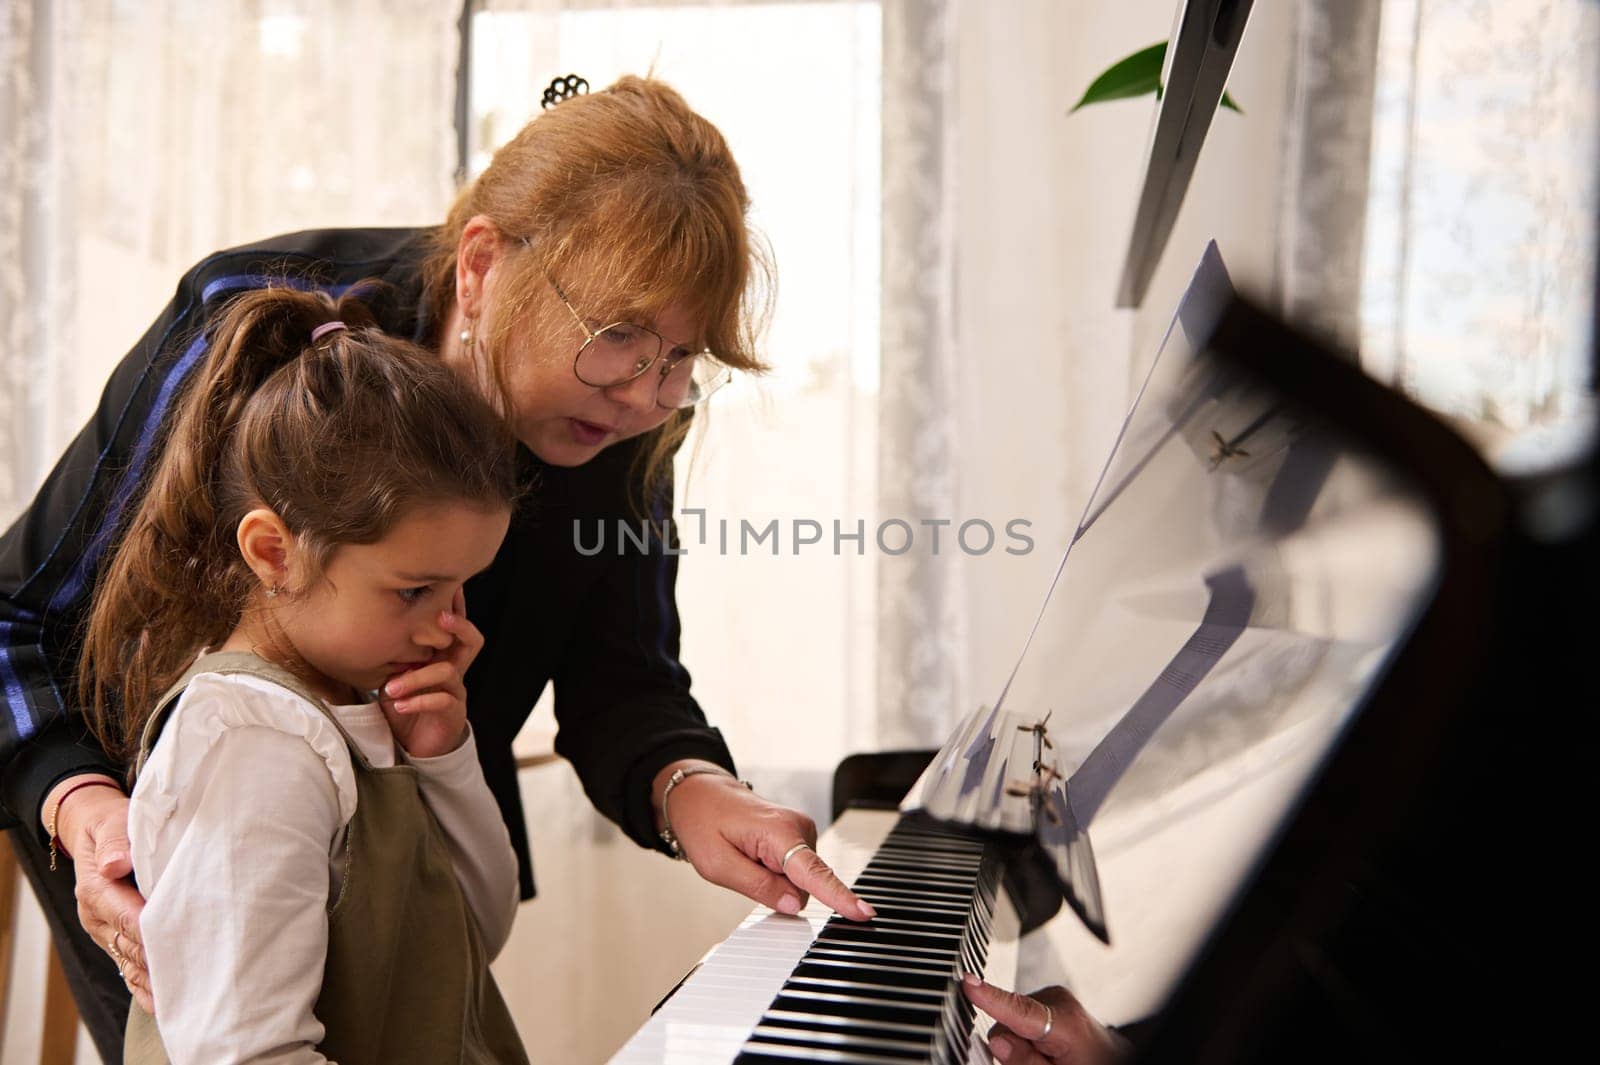 Authentic portrait of a little girl having piano lesson with female teacher musician at home, learning music during individual lesson, touching piano keys, performing classic melody at home interior